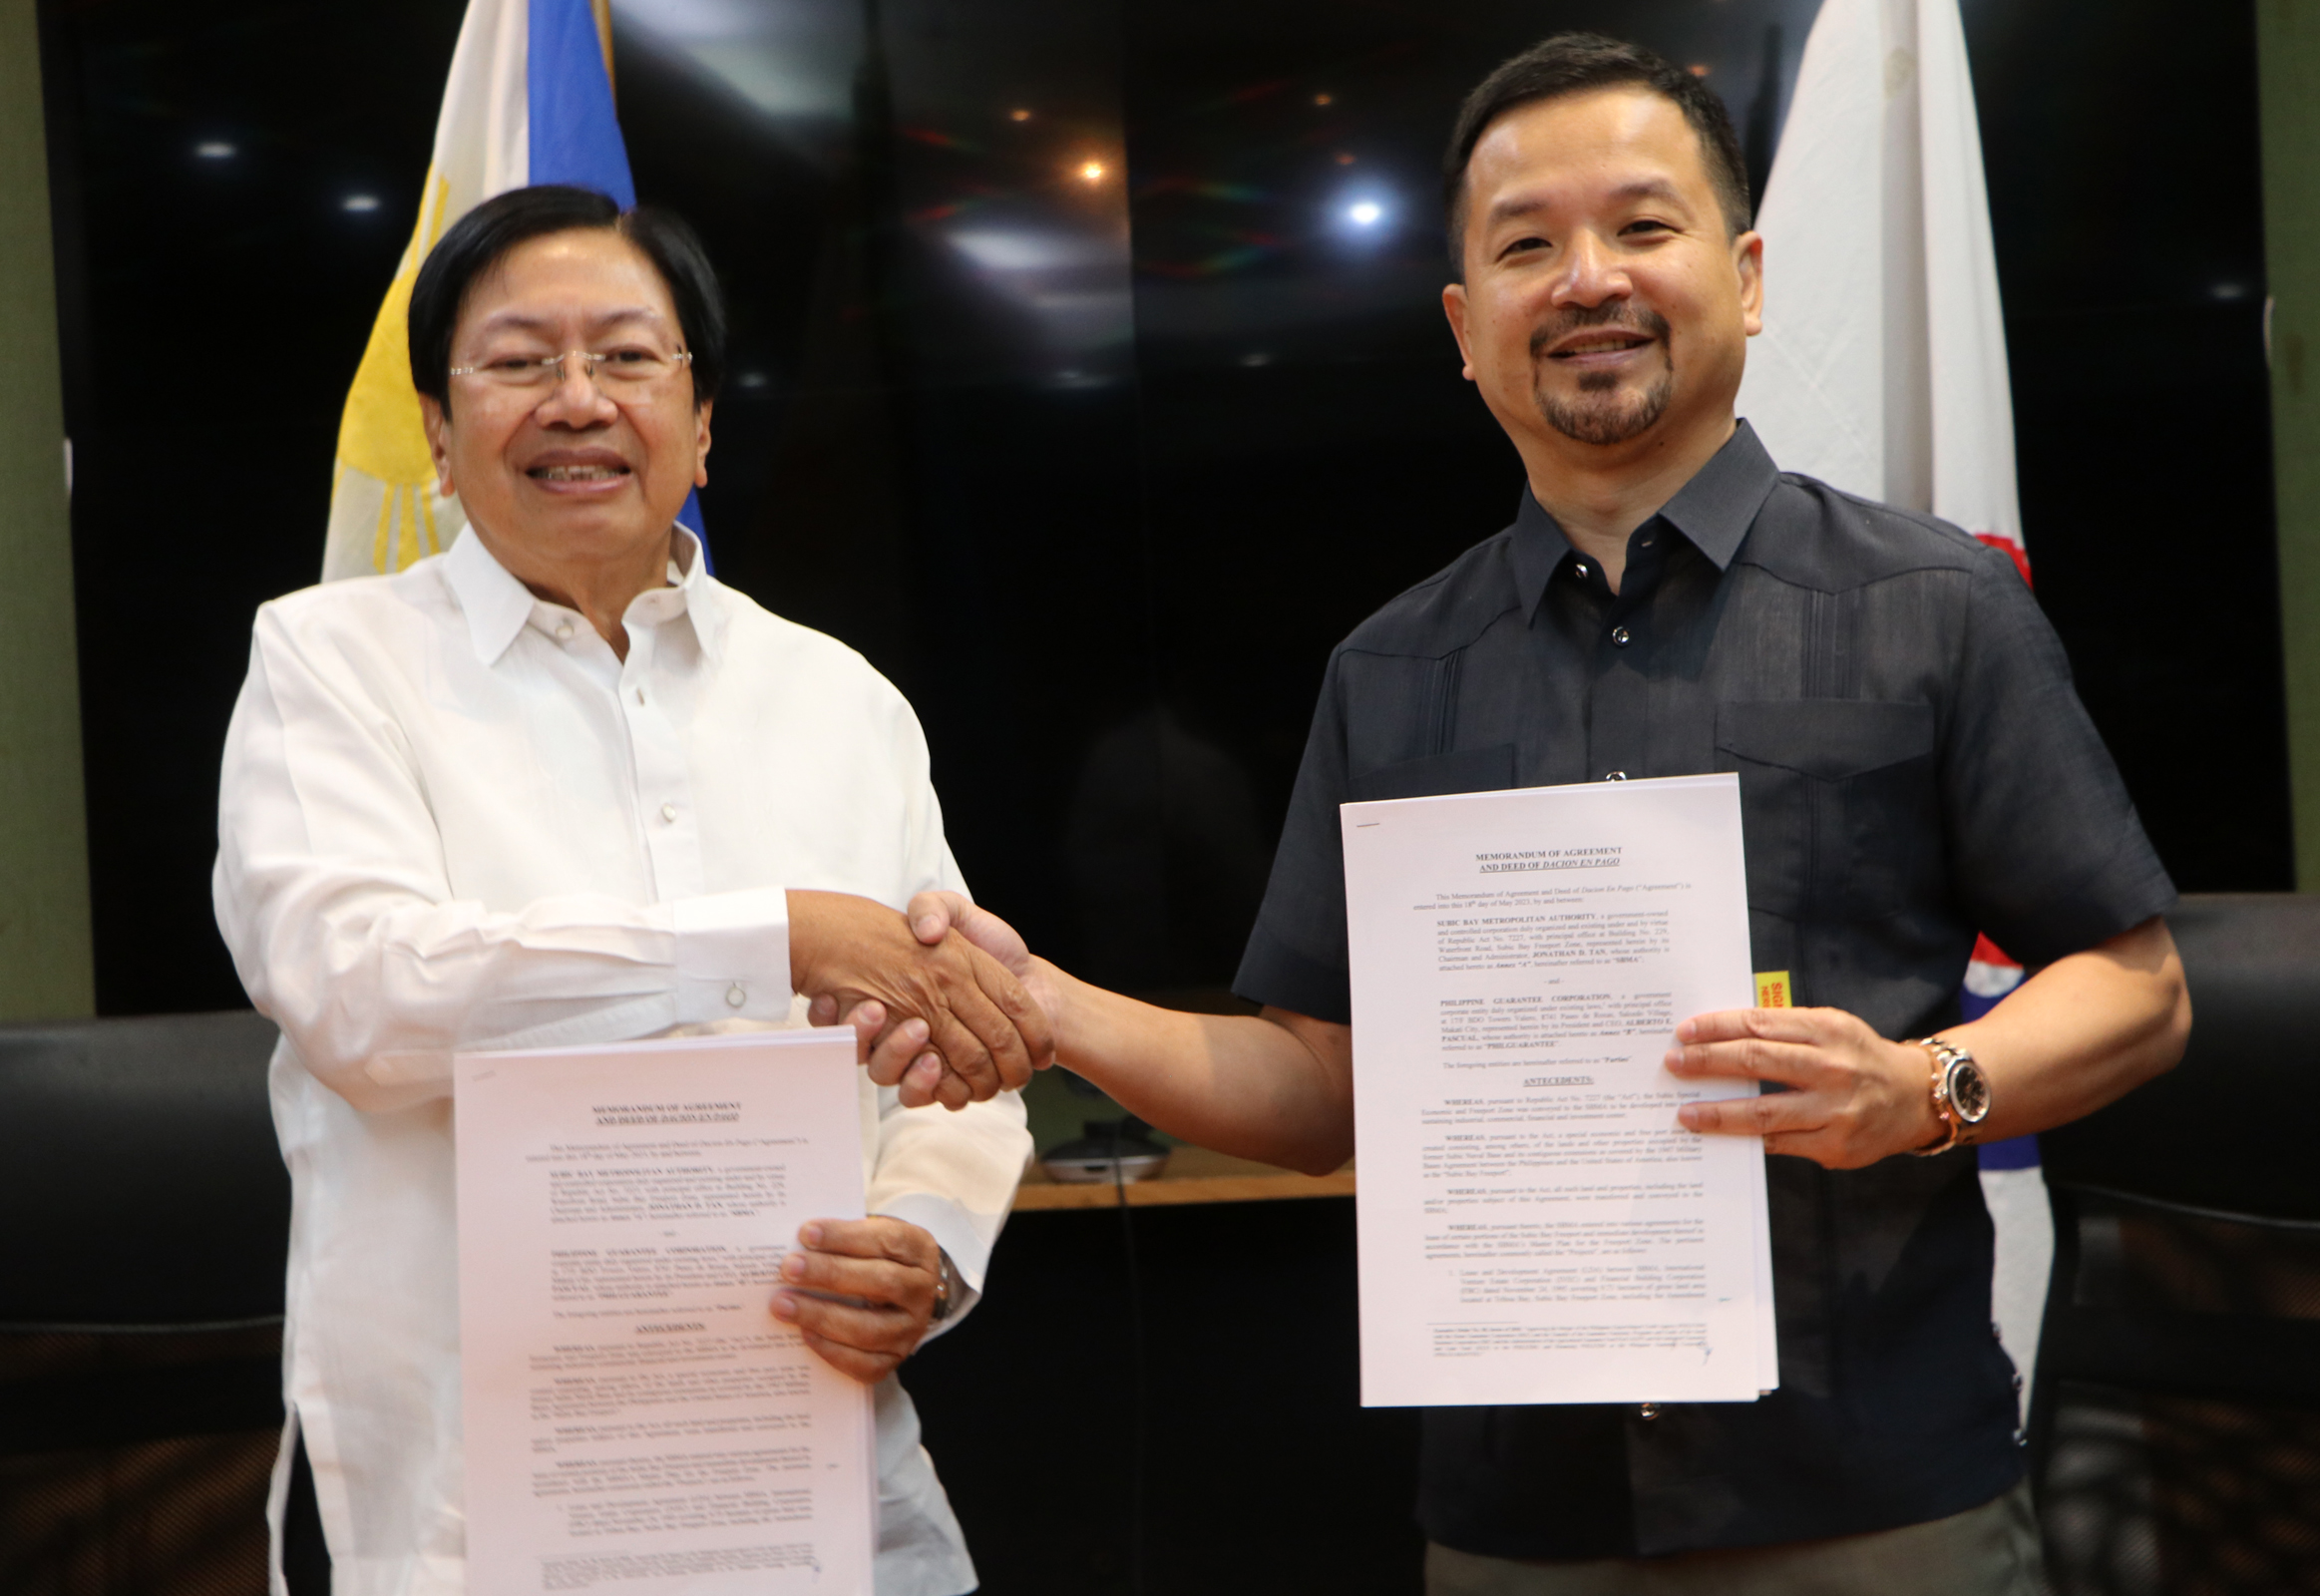 Subic Bay Metropolitan Authority (SBMA) Chairman and Administrator Jonathan D. Tan (right) shakes hand with Philippine Guarantee Corporation (PhilGuarantee) President and CEO Alberto E. Pascual after signing the Memorandum of Agreement and Deed of Dacion en Pago at the SBMA Board Room on Thursday, May 18.